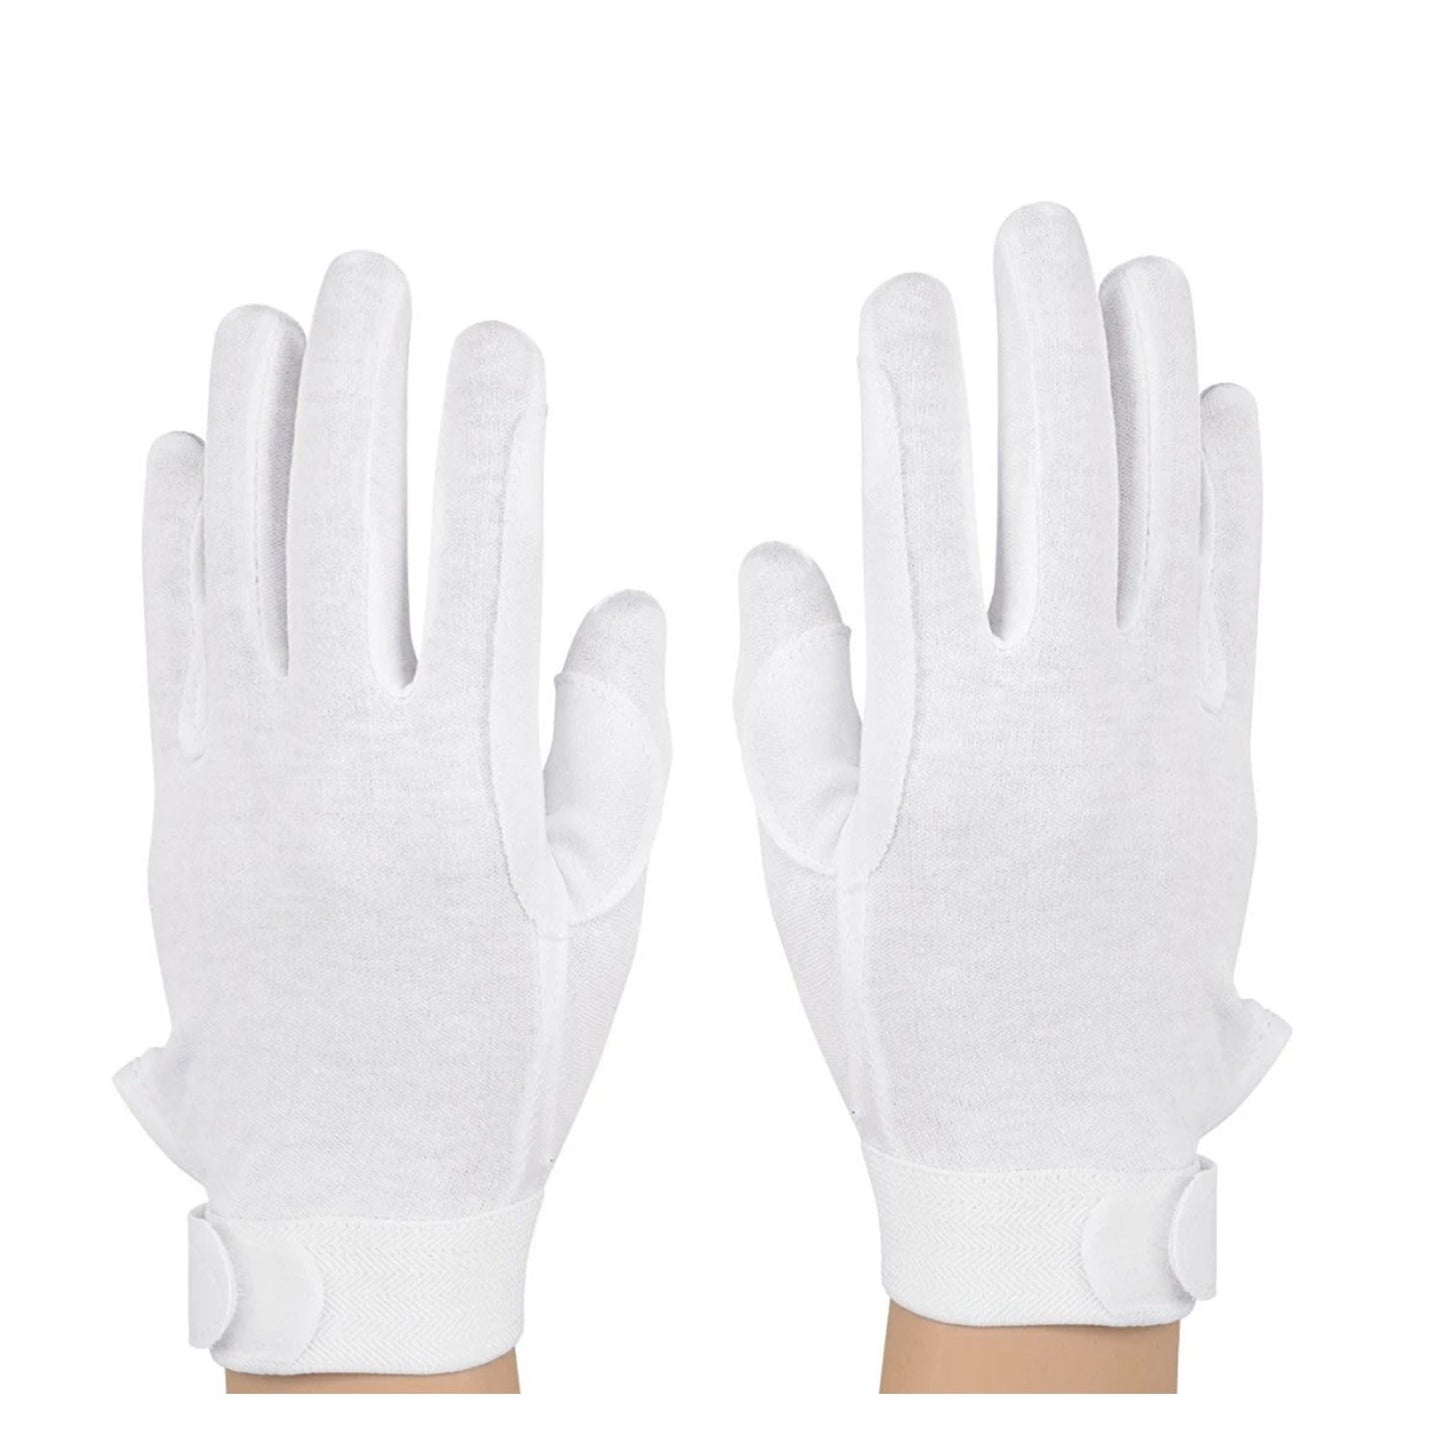 StylePlus Deluxe Cotton Military Gloves